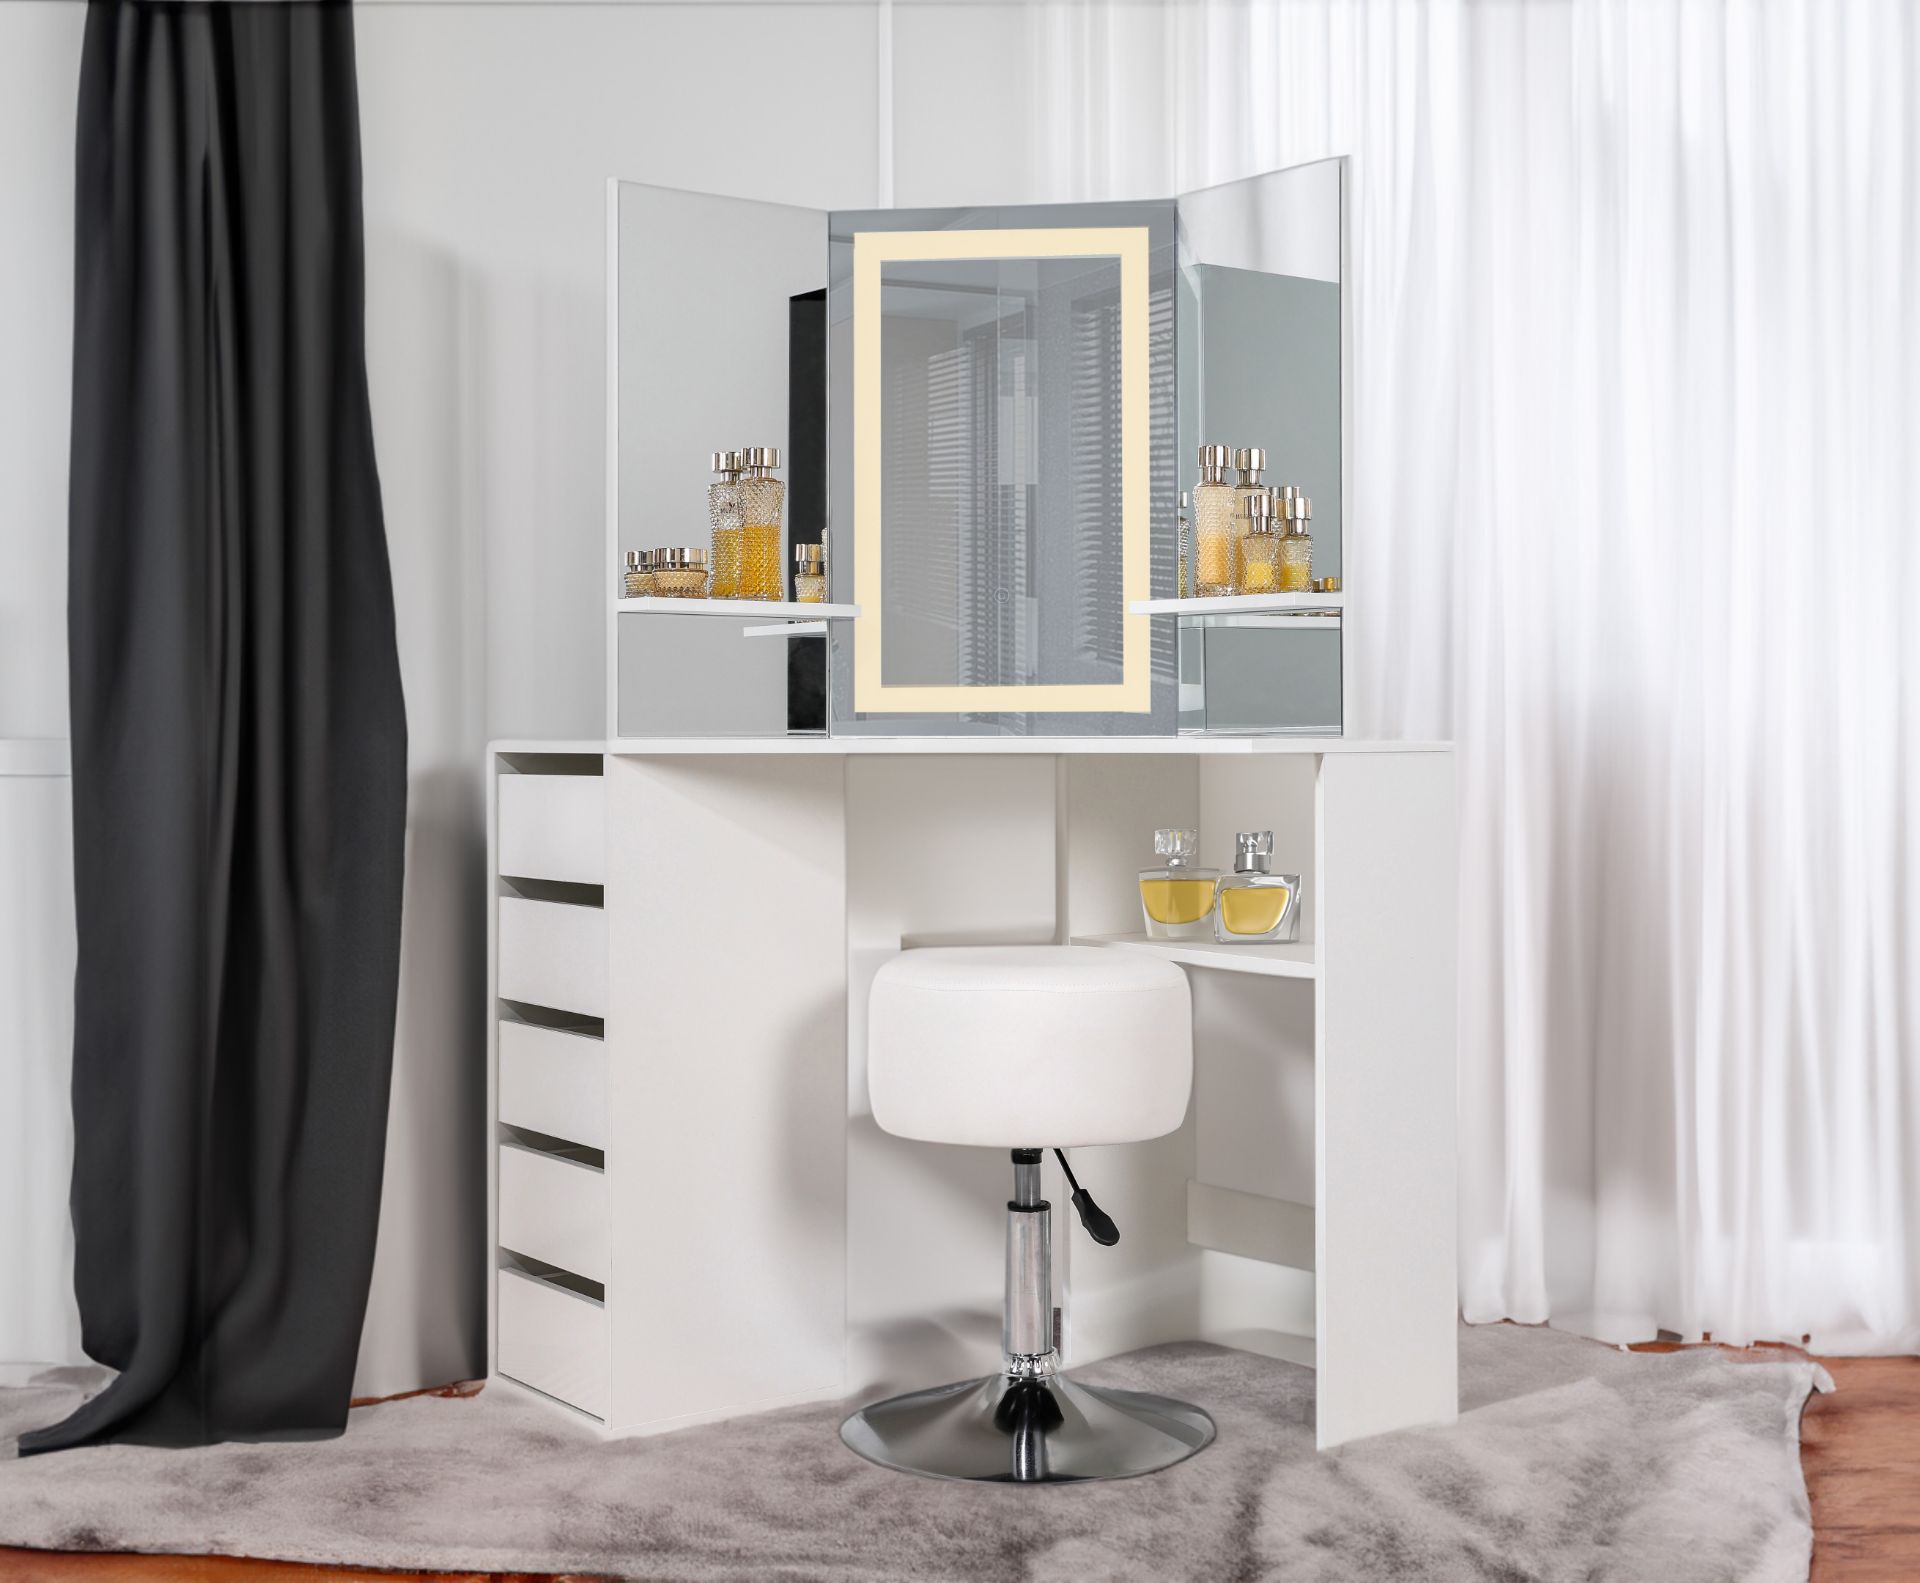 BRAND NEW MAKE UP CORNER DRESSING TABLE 5 DRAWER WITH TOUCH LED MIRROR & STOOL RRP £350